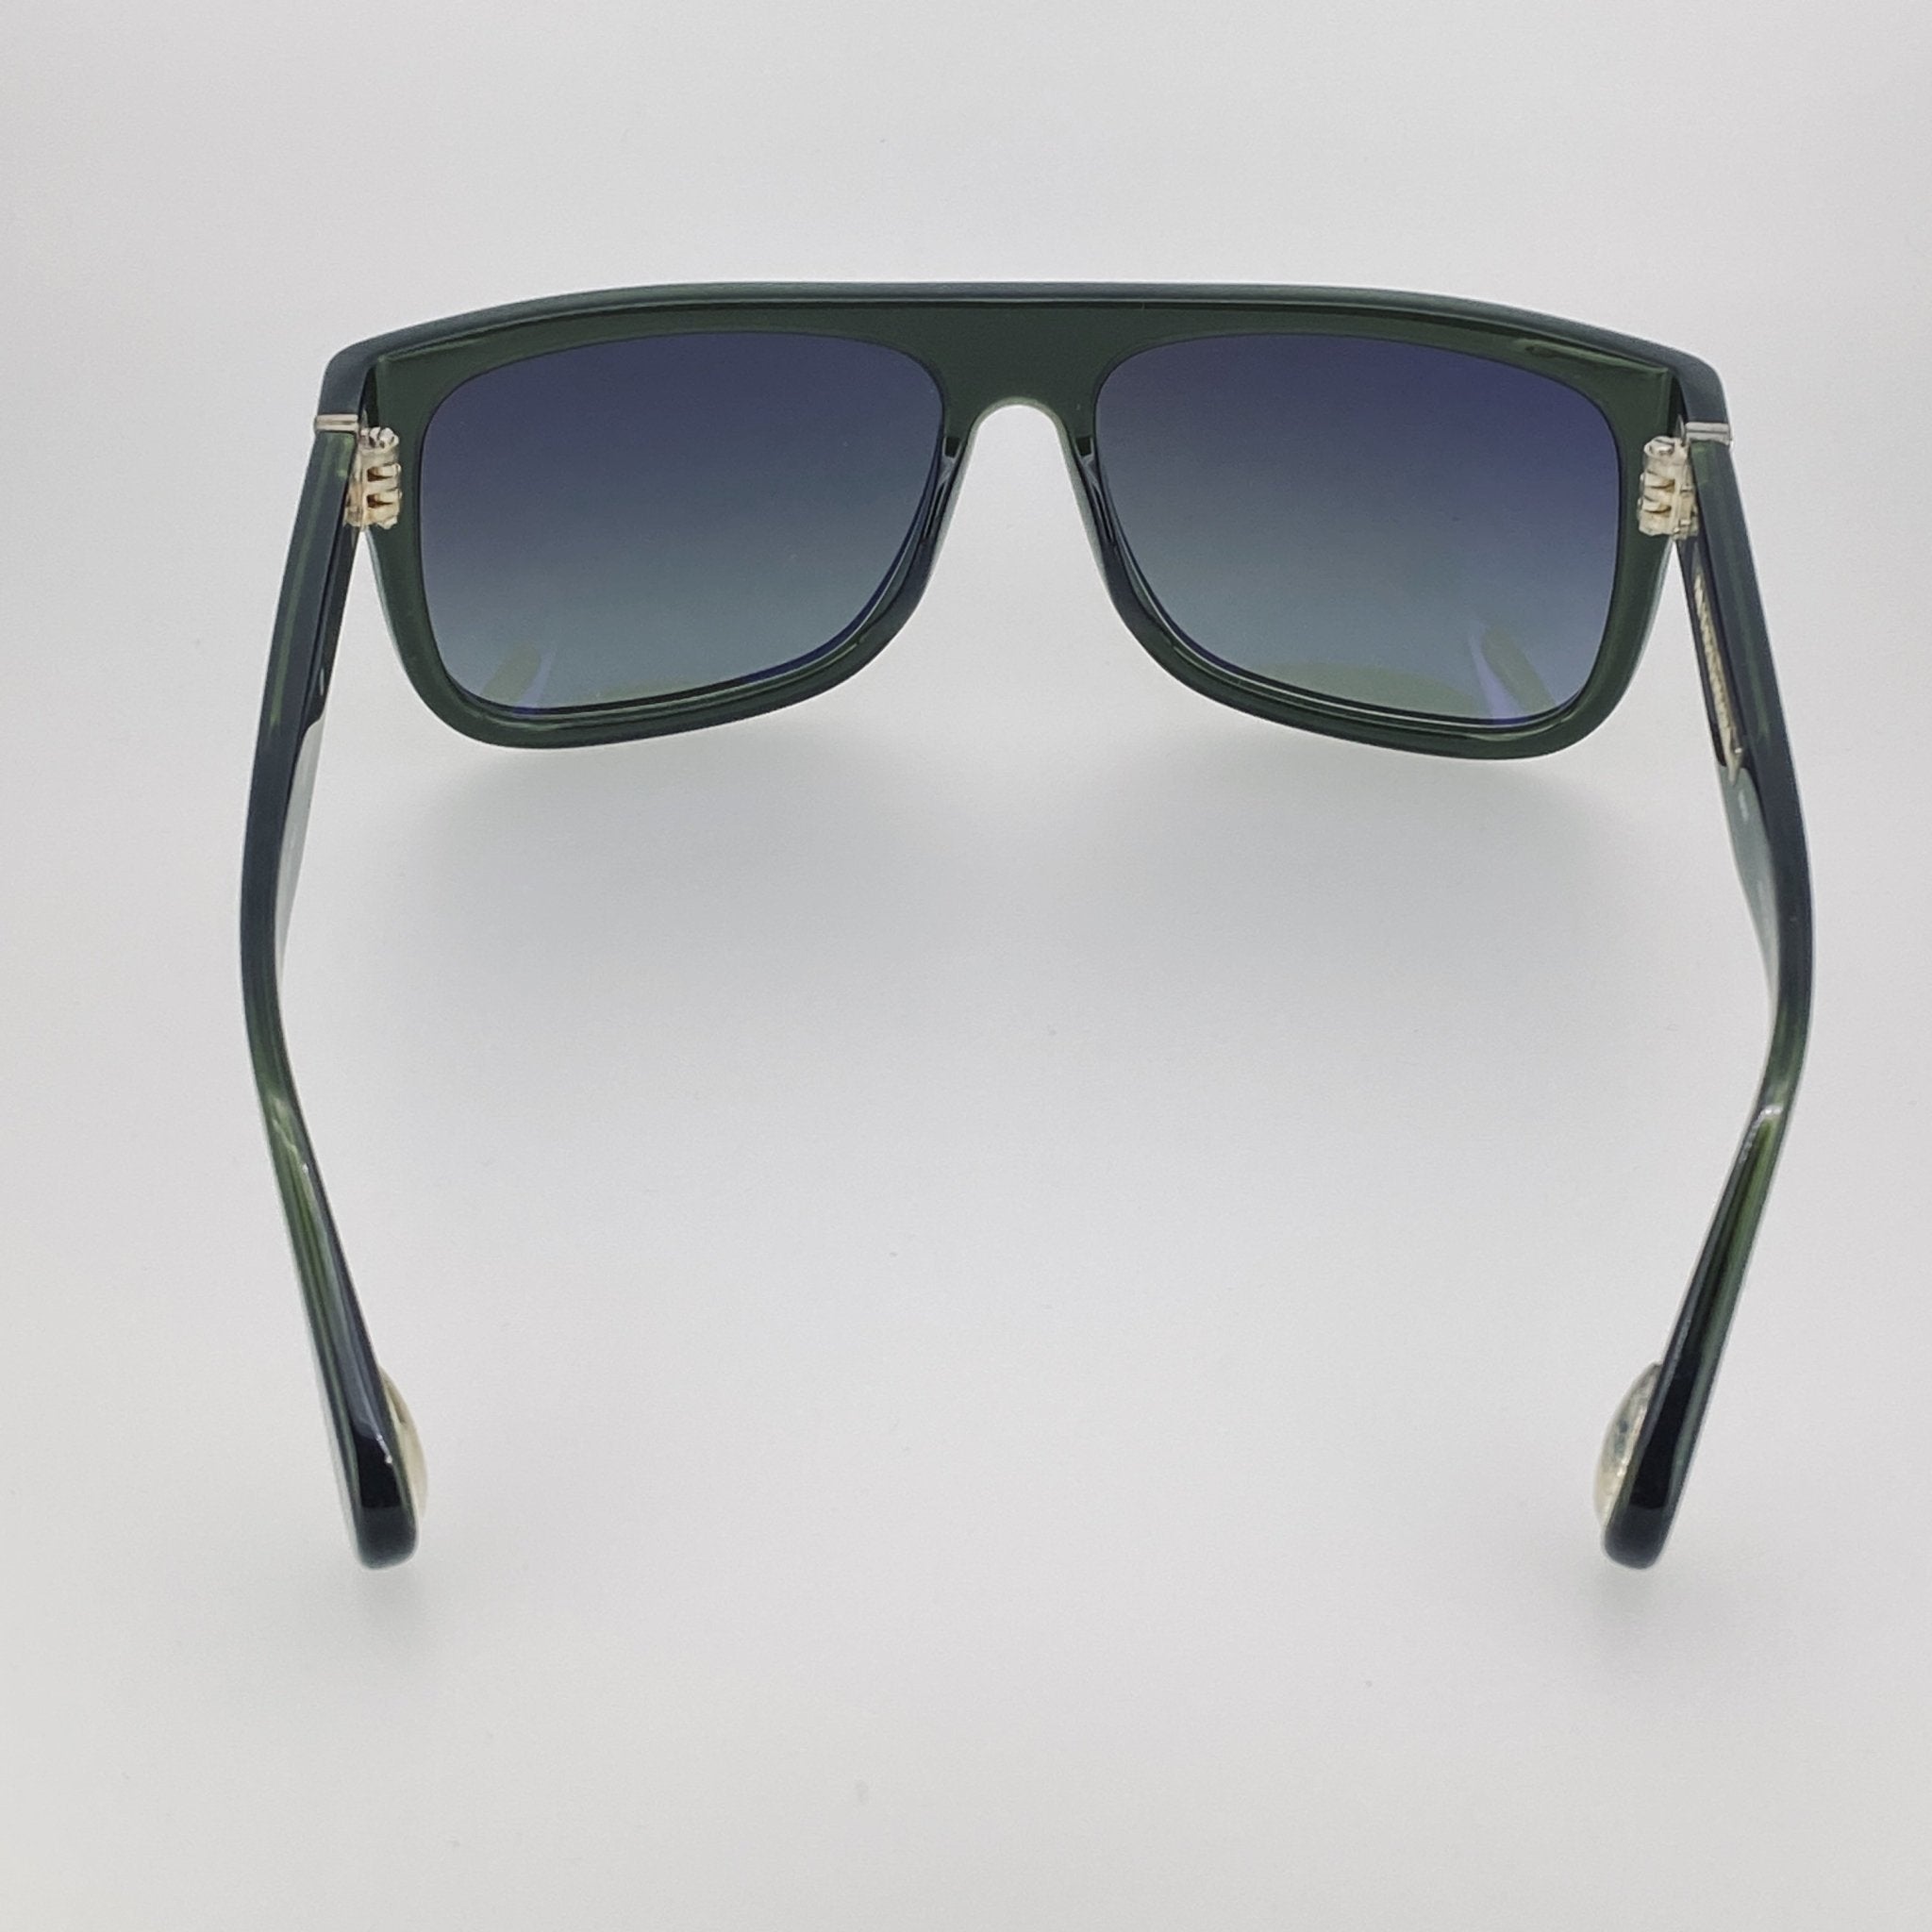 Ann Demeulemeester Sunglasses Flat Top Green 925 Silver with Green Lenses Category 3 Dark Tint AD2C7SUN - Watches & Crystals